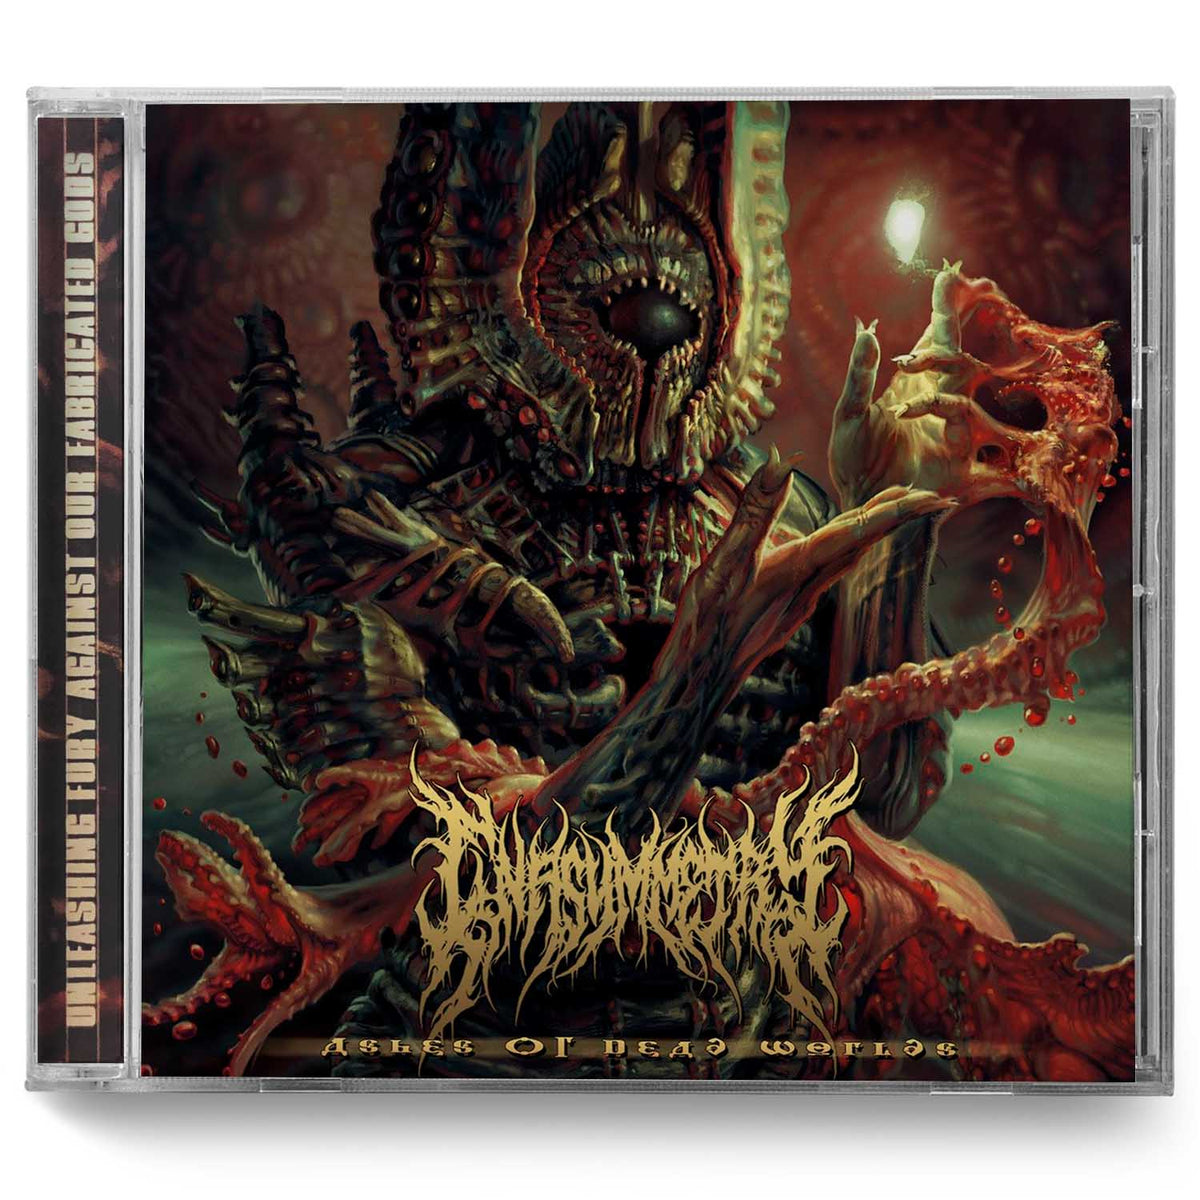 In Asymmetry "Ashes of Dead Worlds" CD - Miasma Records